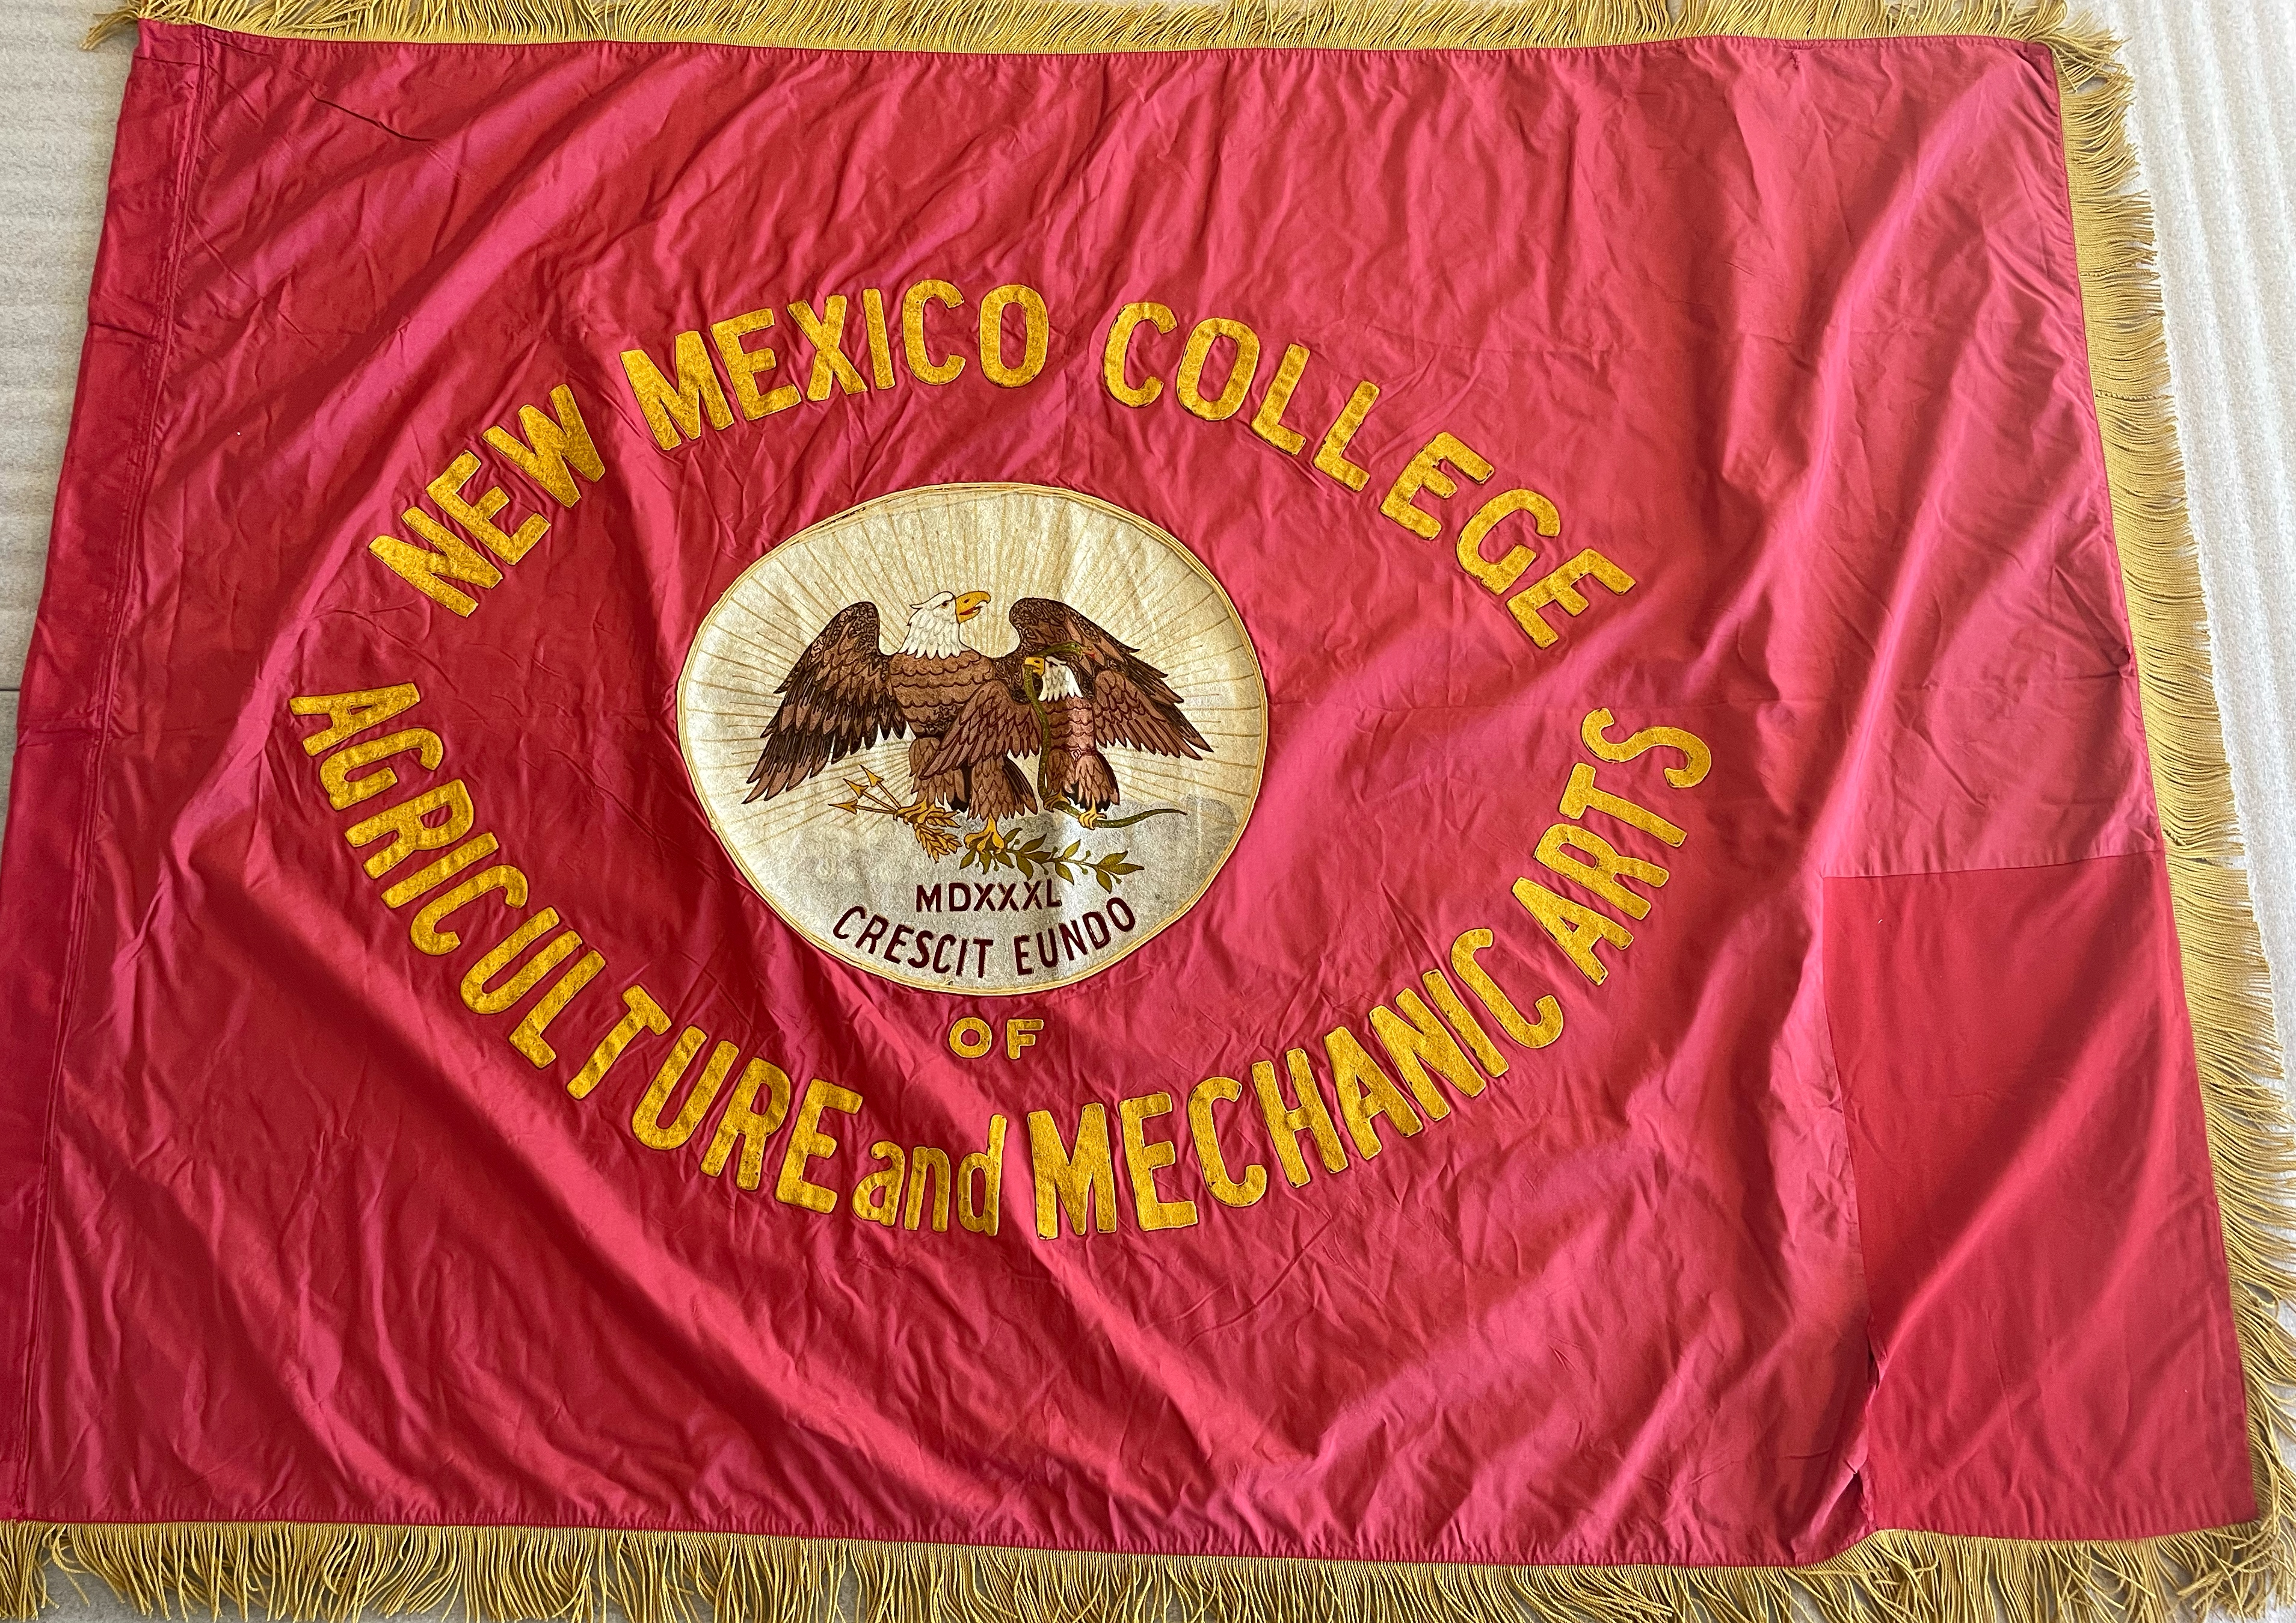 Red New Mexico College of Agriculture and Mechanic Arts flag/banner with seal of state of New Mexico in center and gold lettering